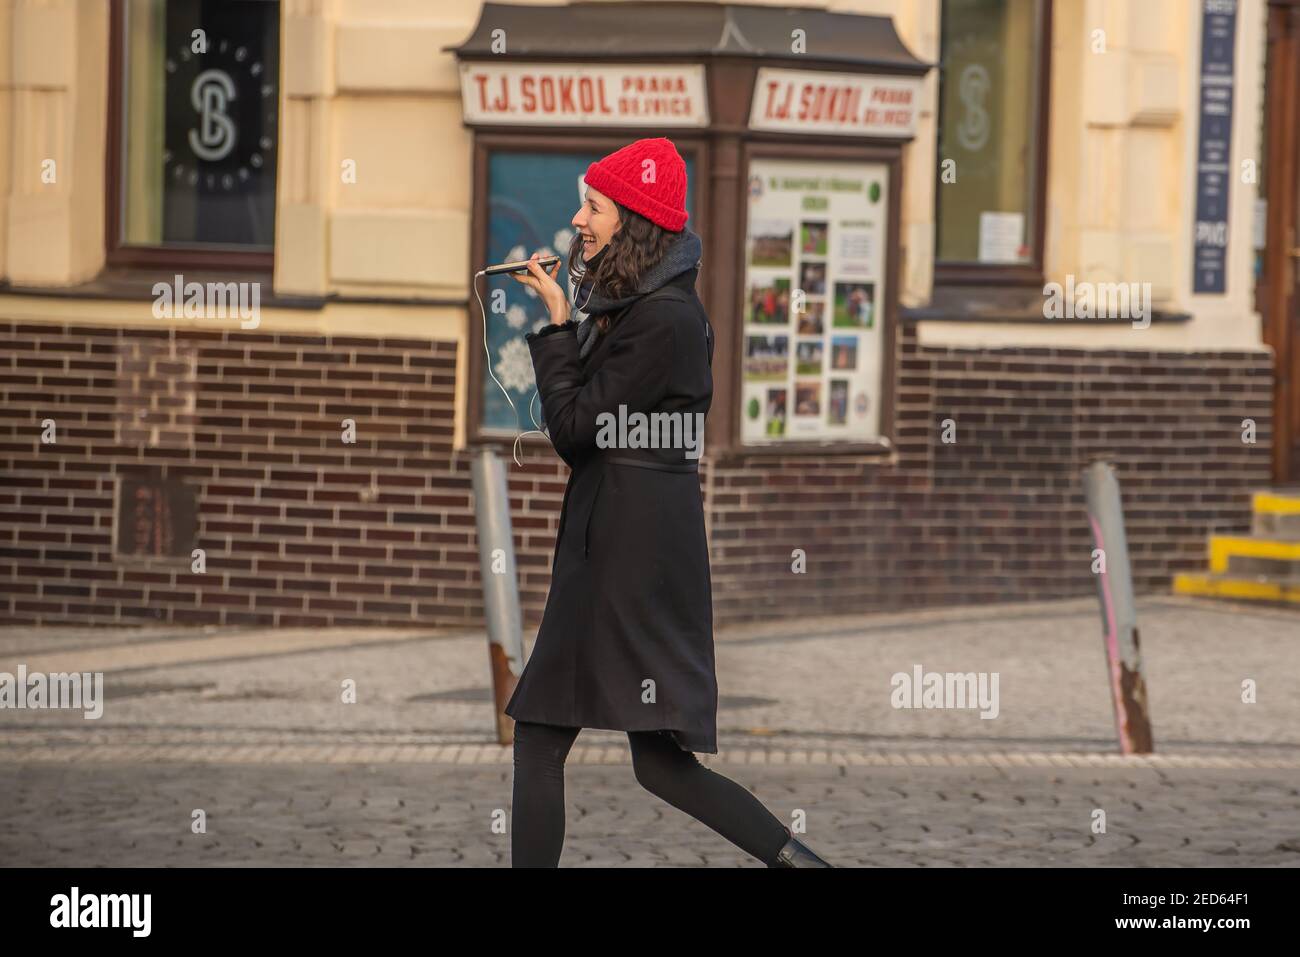 Prague, Czech Republic. 02-13-2021. Young trendy woman dress in black with red hat is laughing while speaking on the phone in the city center of Pragu Stock Photo